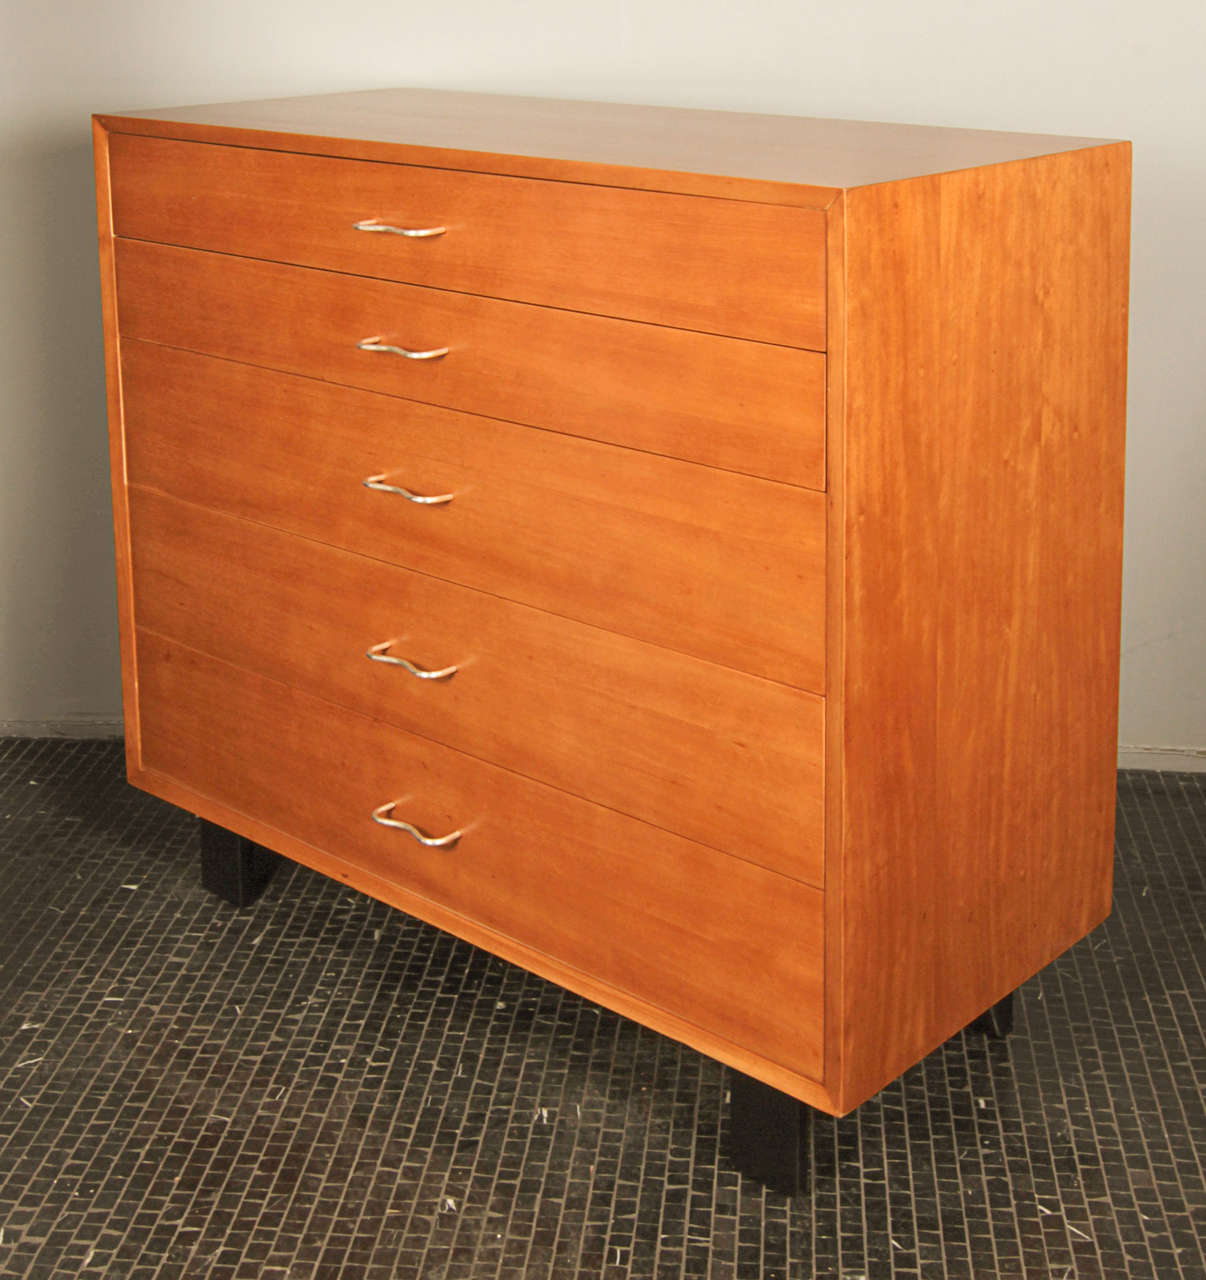 Pair of George Nelson primavera five-drawer dressers with 